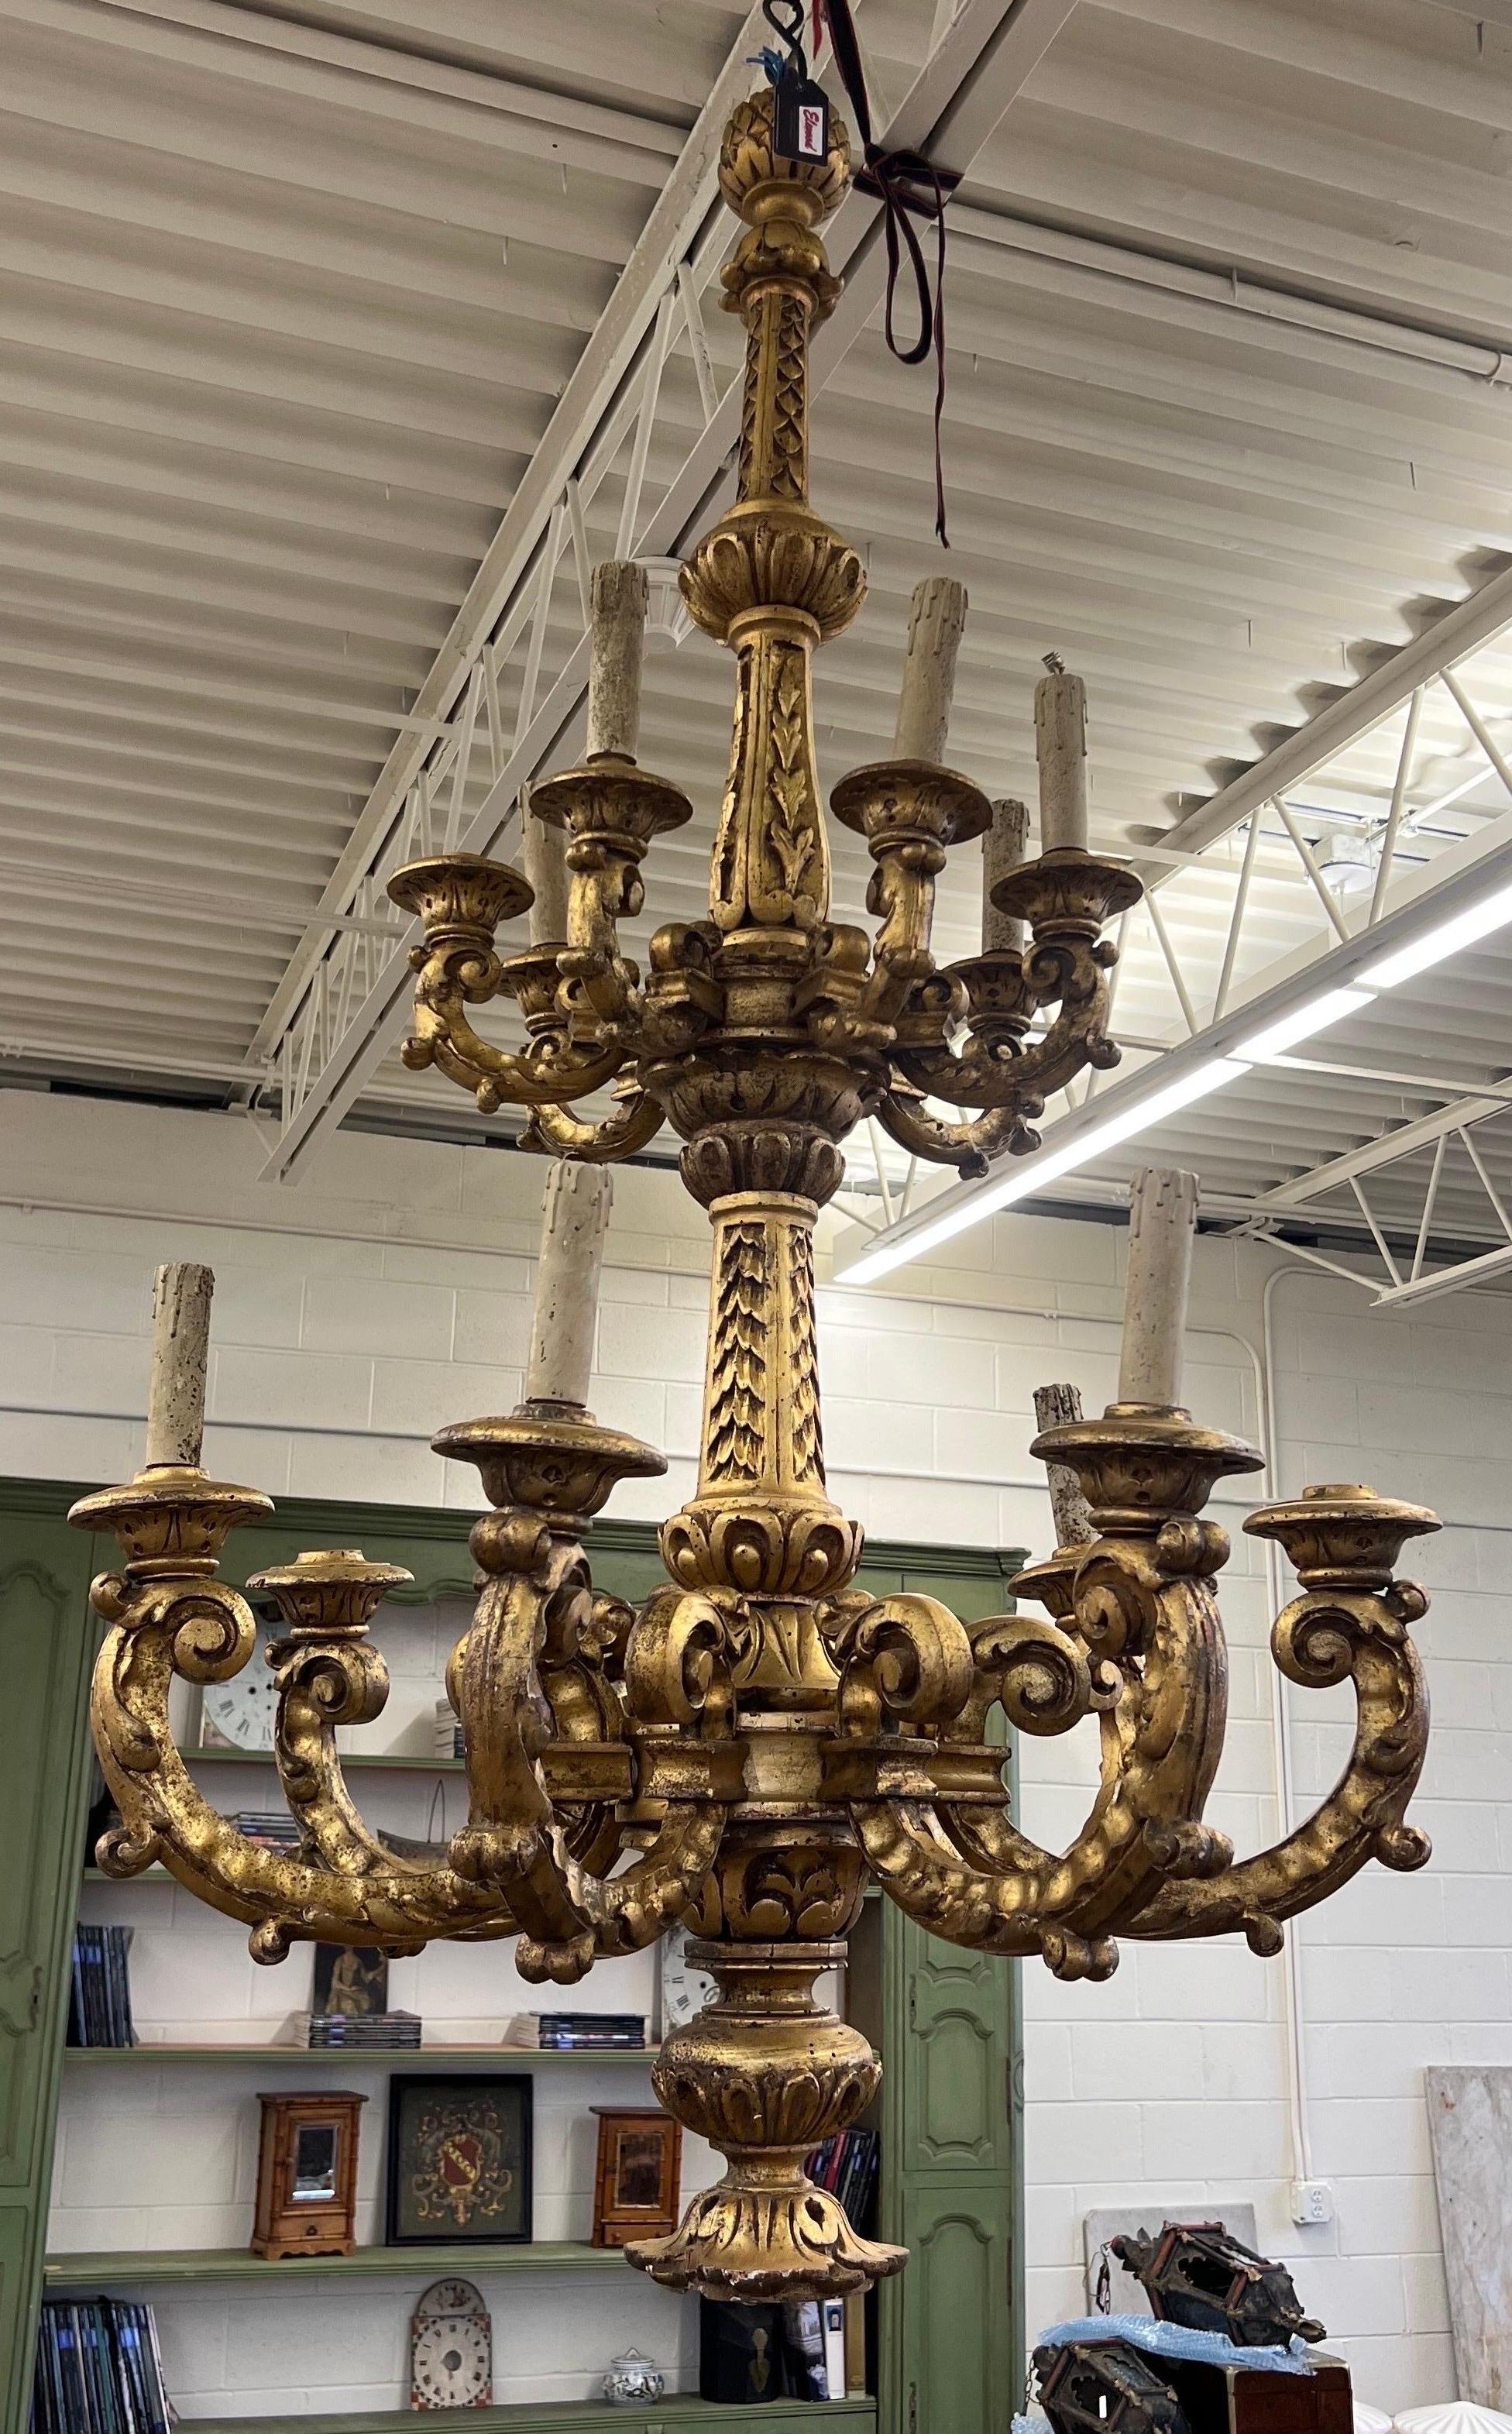 Great quality grand scale late 19th century double tier Italian giltwood chandelier. This statement piece is all hand carved with two tiers of 7 giltwood arms each and has one downward facing socket at the base as well. Recently rewired though still